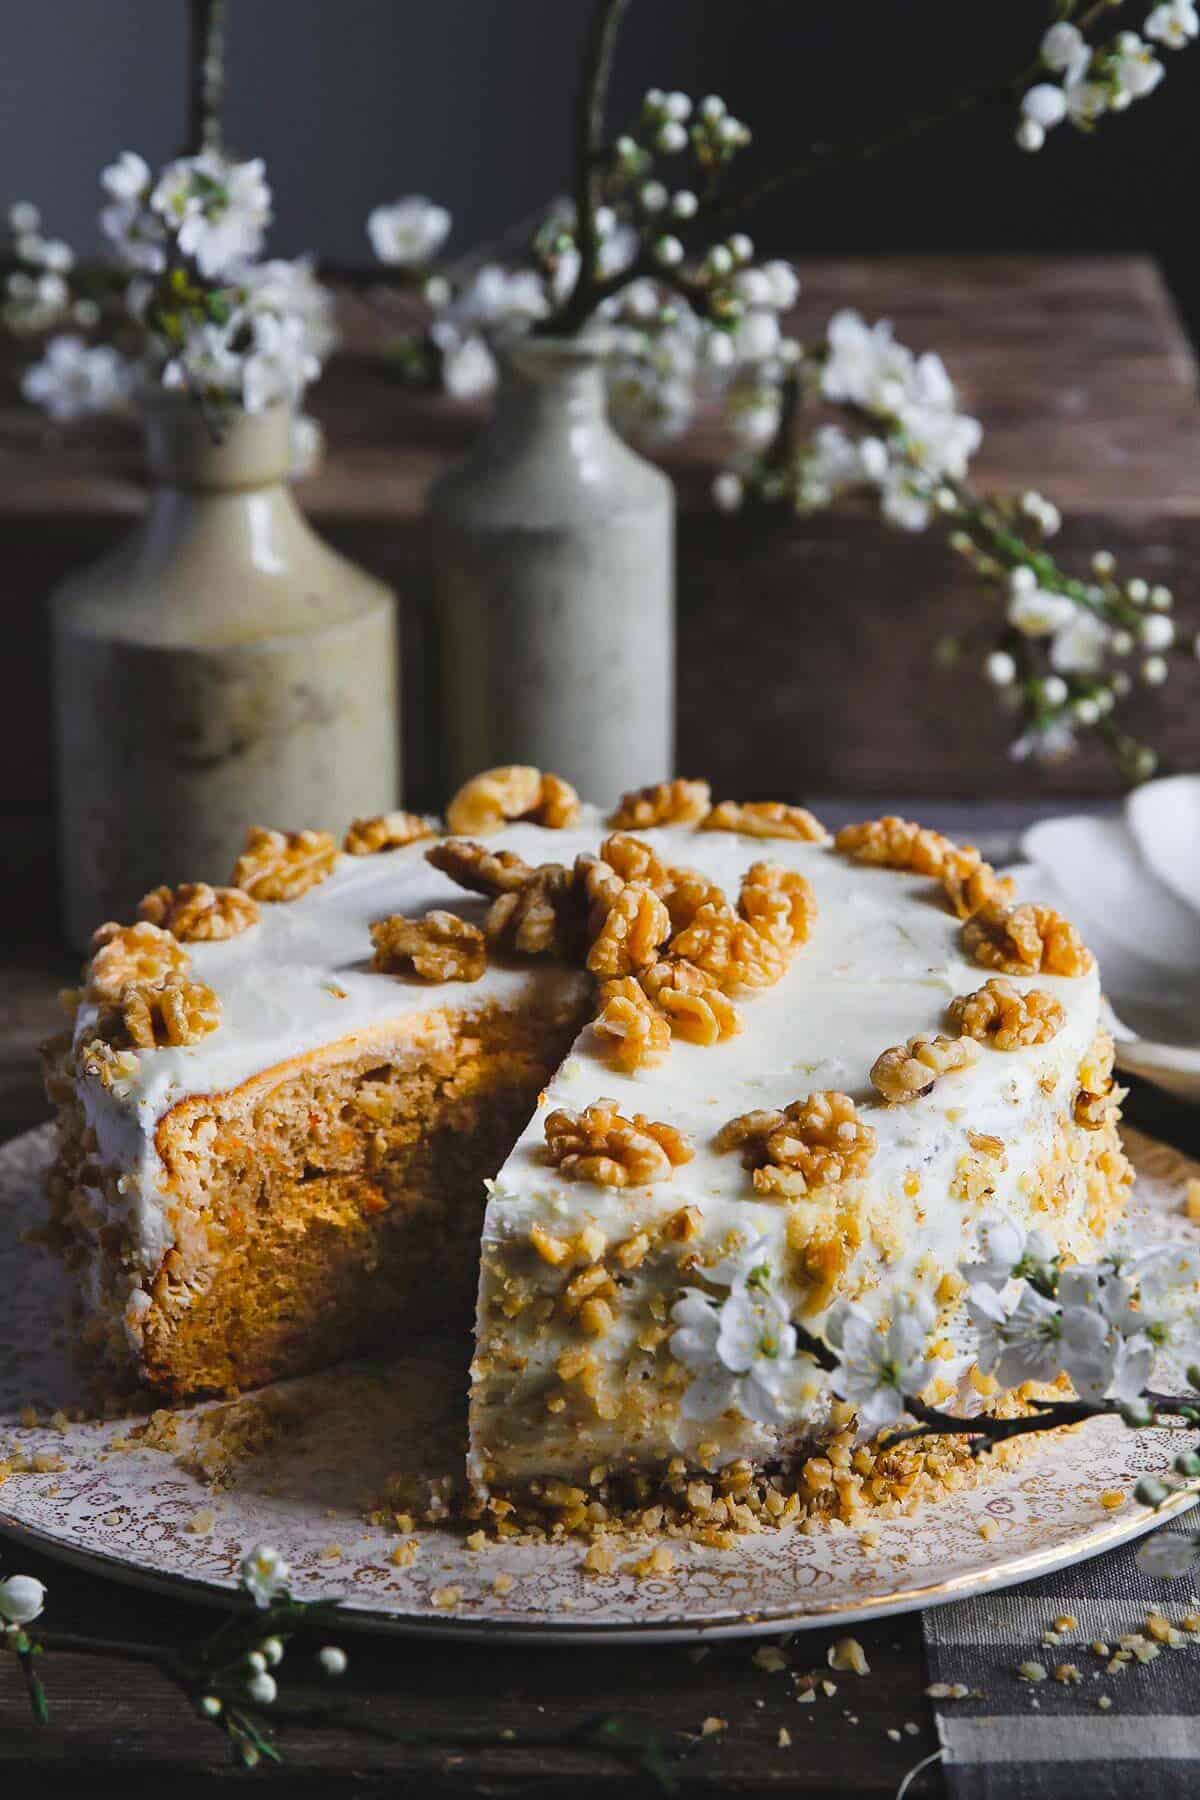 Carrot cake cheesecake on a cake stand with one slice removed.